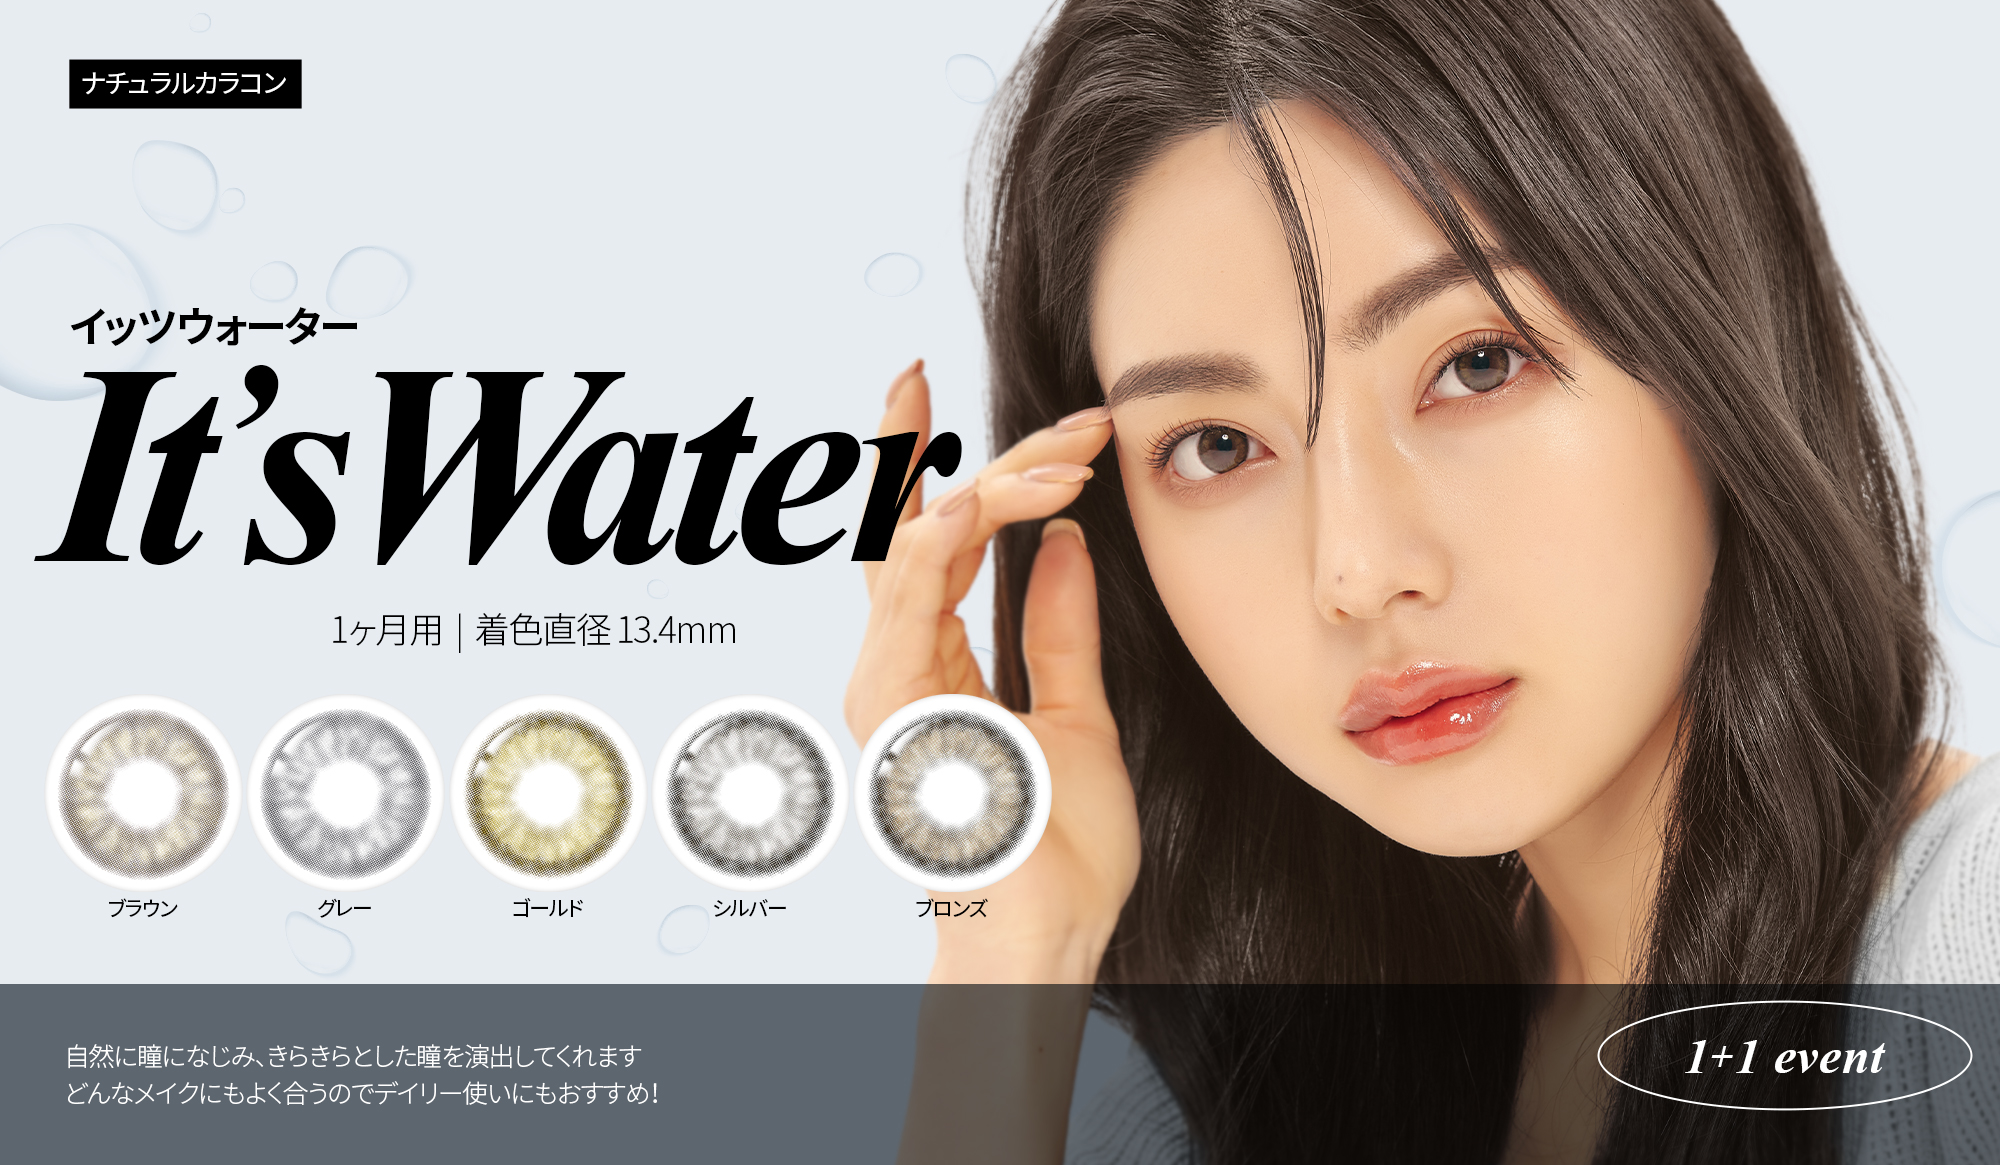 【Event】Its Water